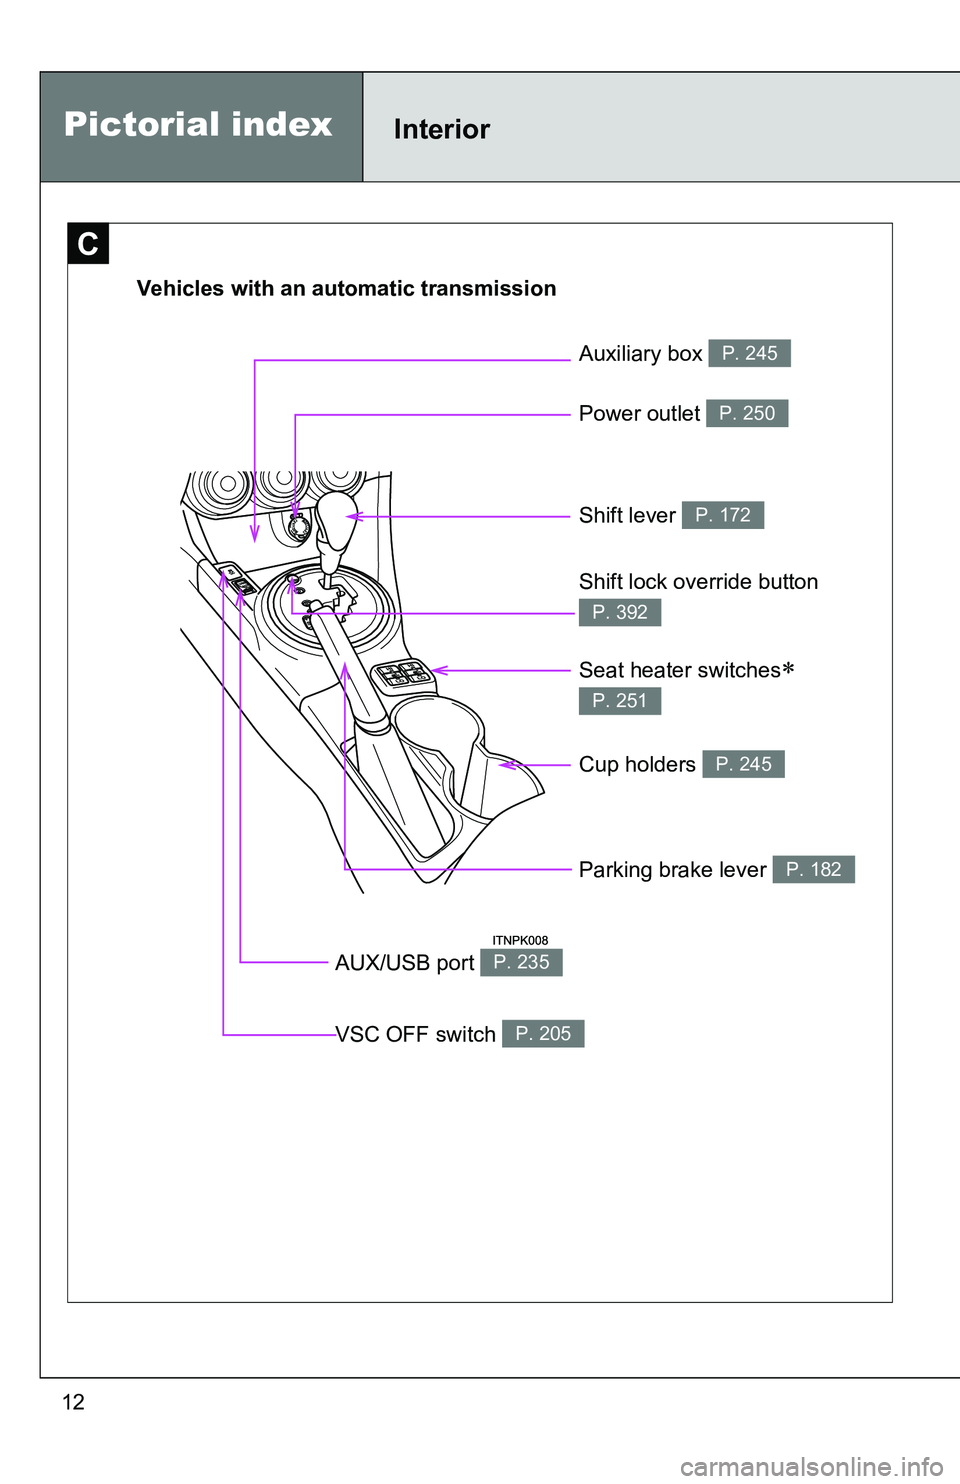 TOYOTA tC 2011  Owners Manual (in English) 12Vehicles with an automatic transmission
Power outlet P. 250
Shift lever P. 172
Seat heater switches 
P. 251
AUX/USB port P. 235
Shift lock override button 
P. 392
Pictorial indexInterior
C
Cup ho